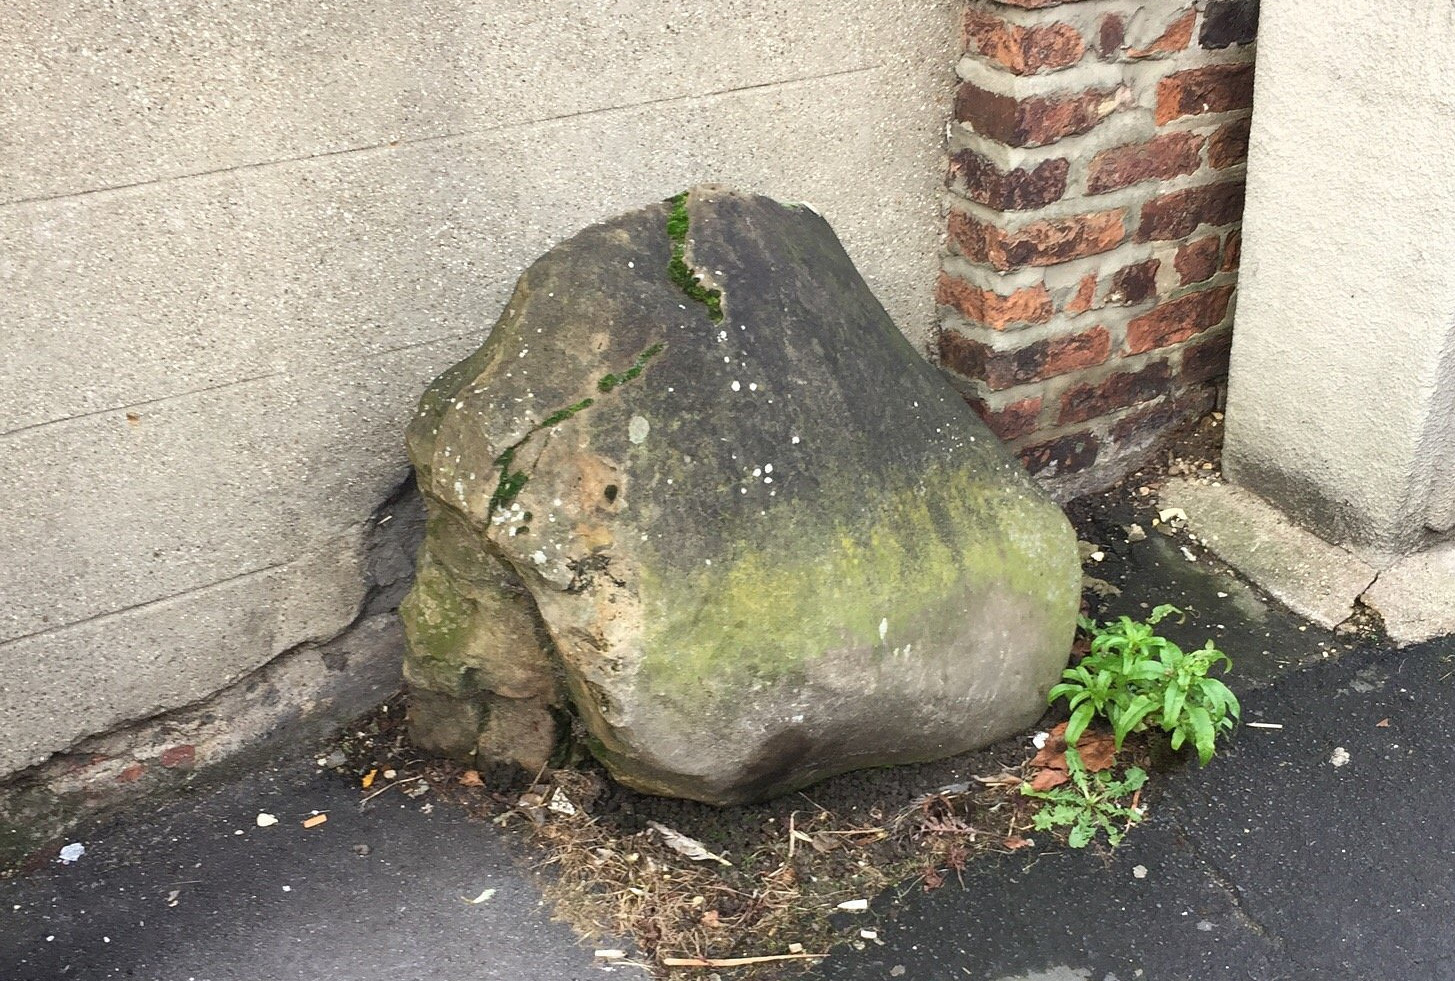 The Giant's Stone lead image.